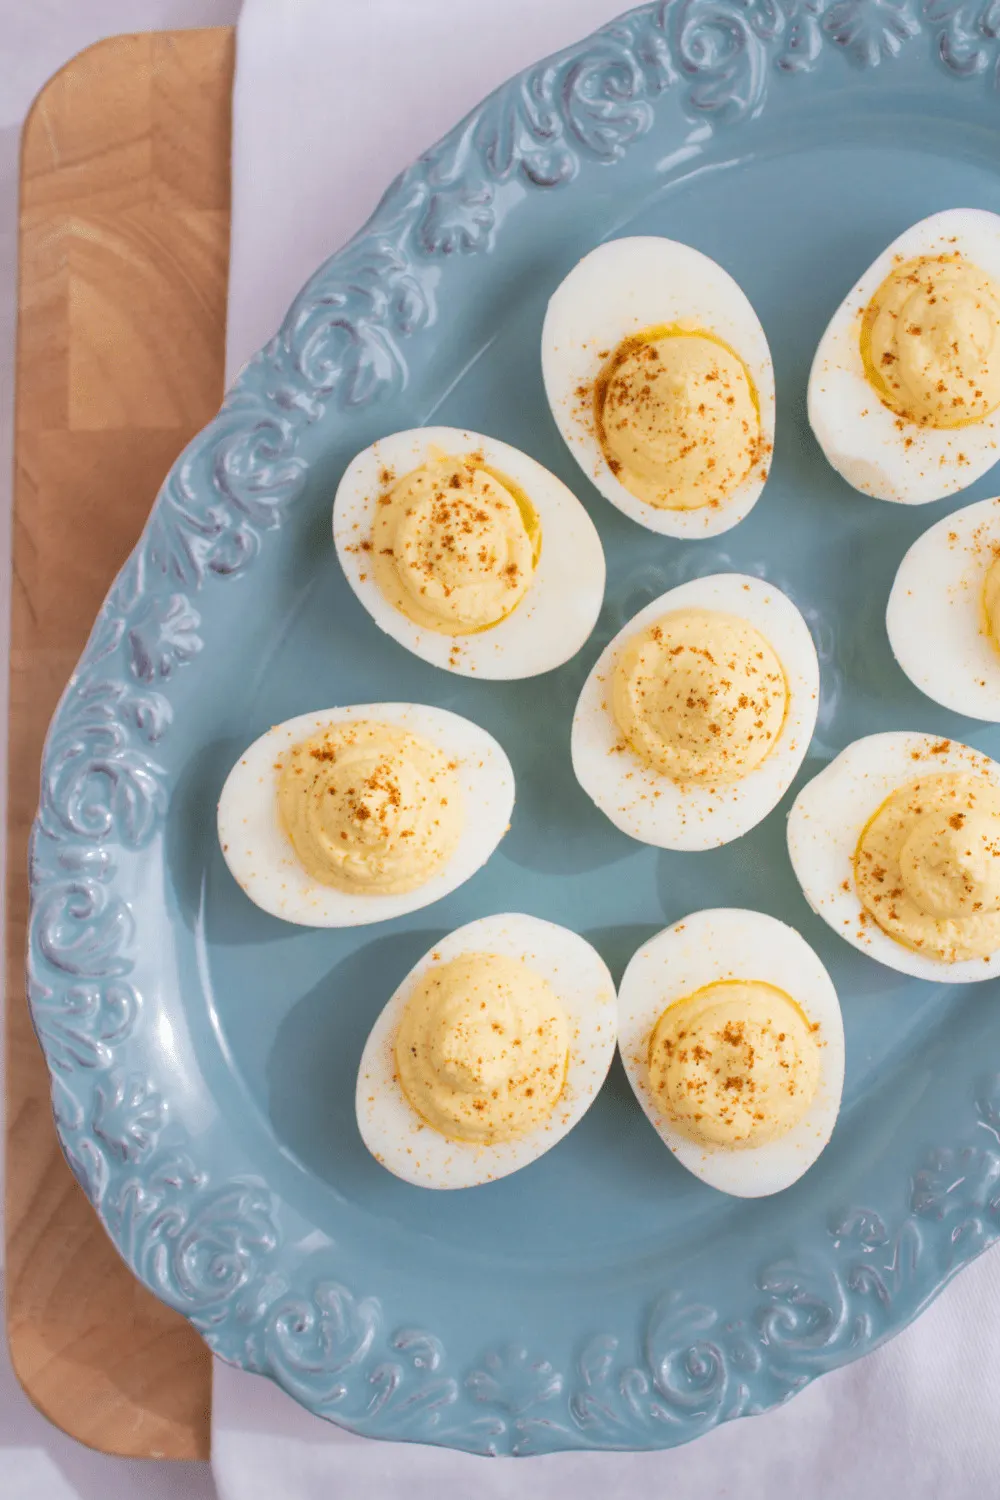 Healthy Easter Recipes - Deviled Eggs by Fantastic Food!